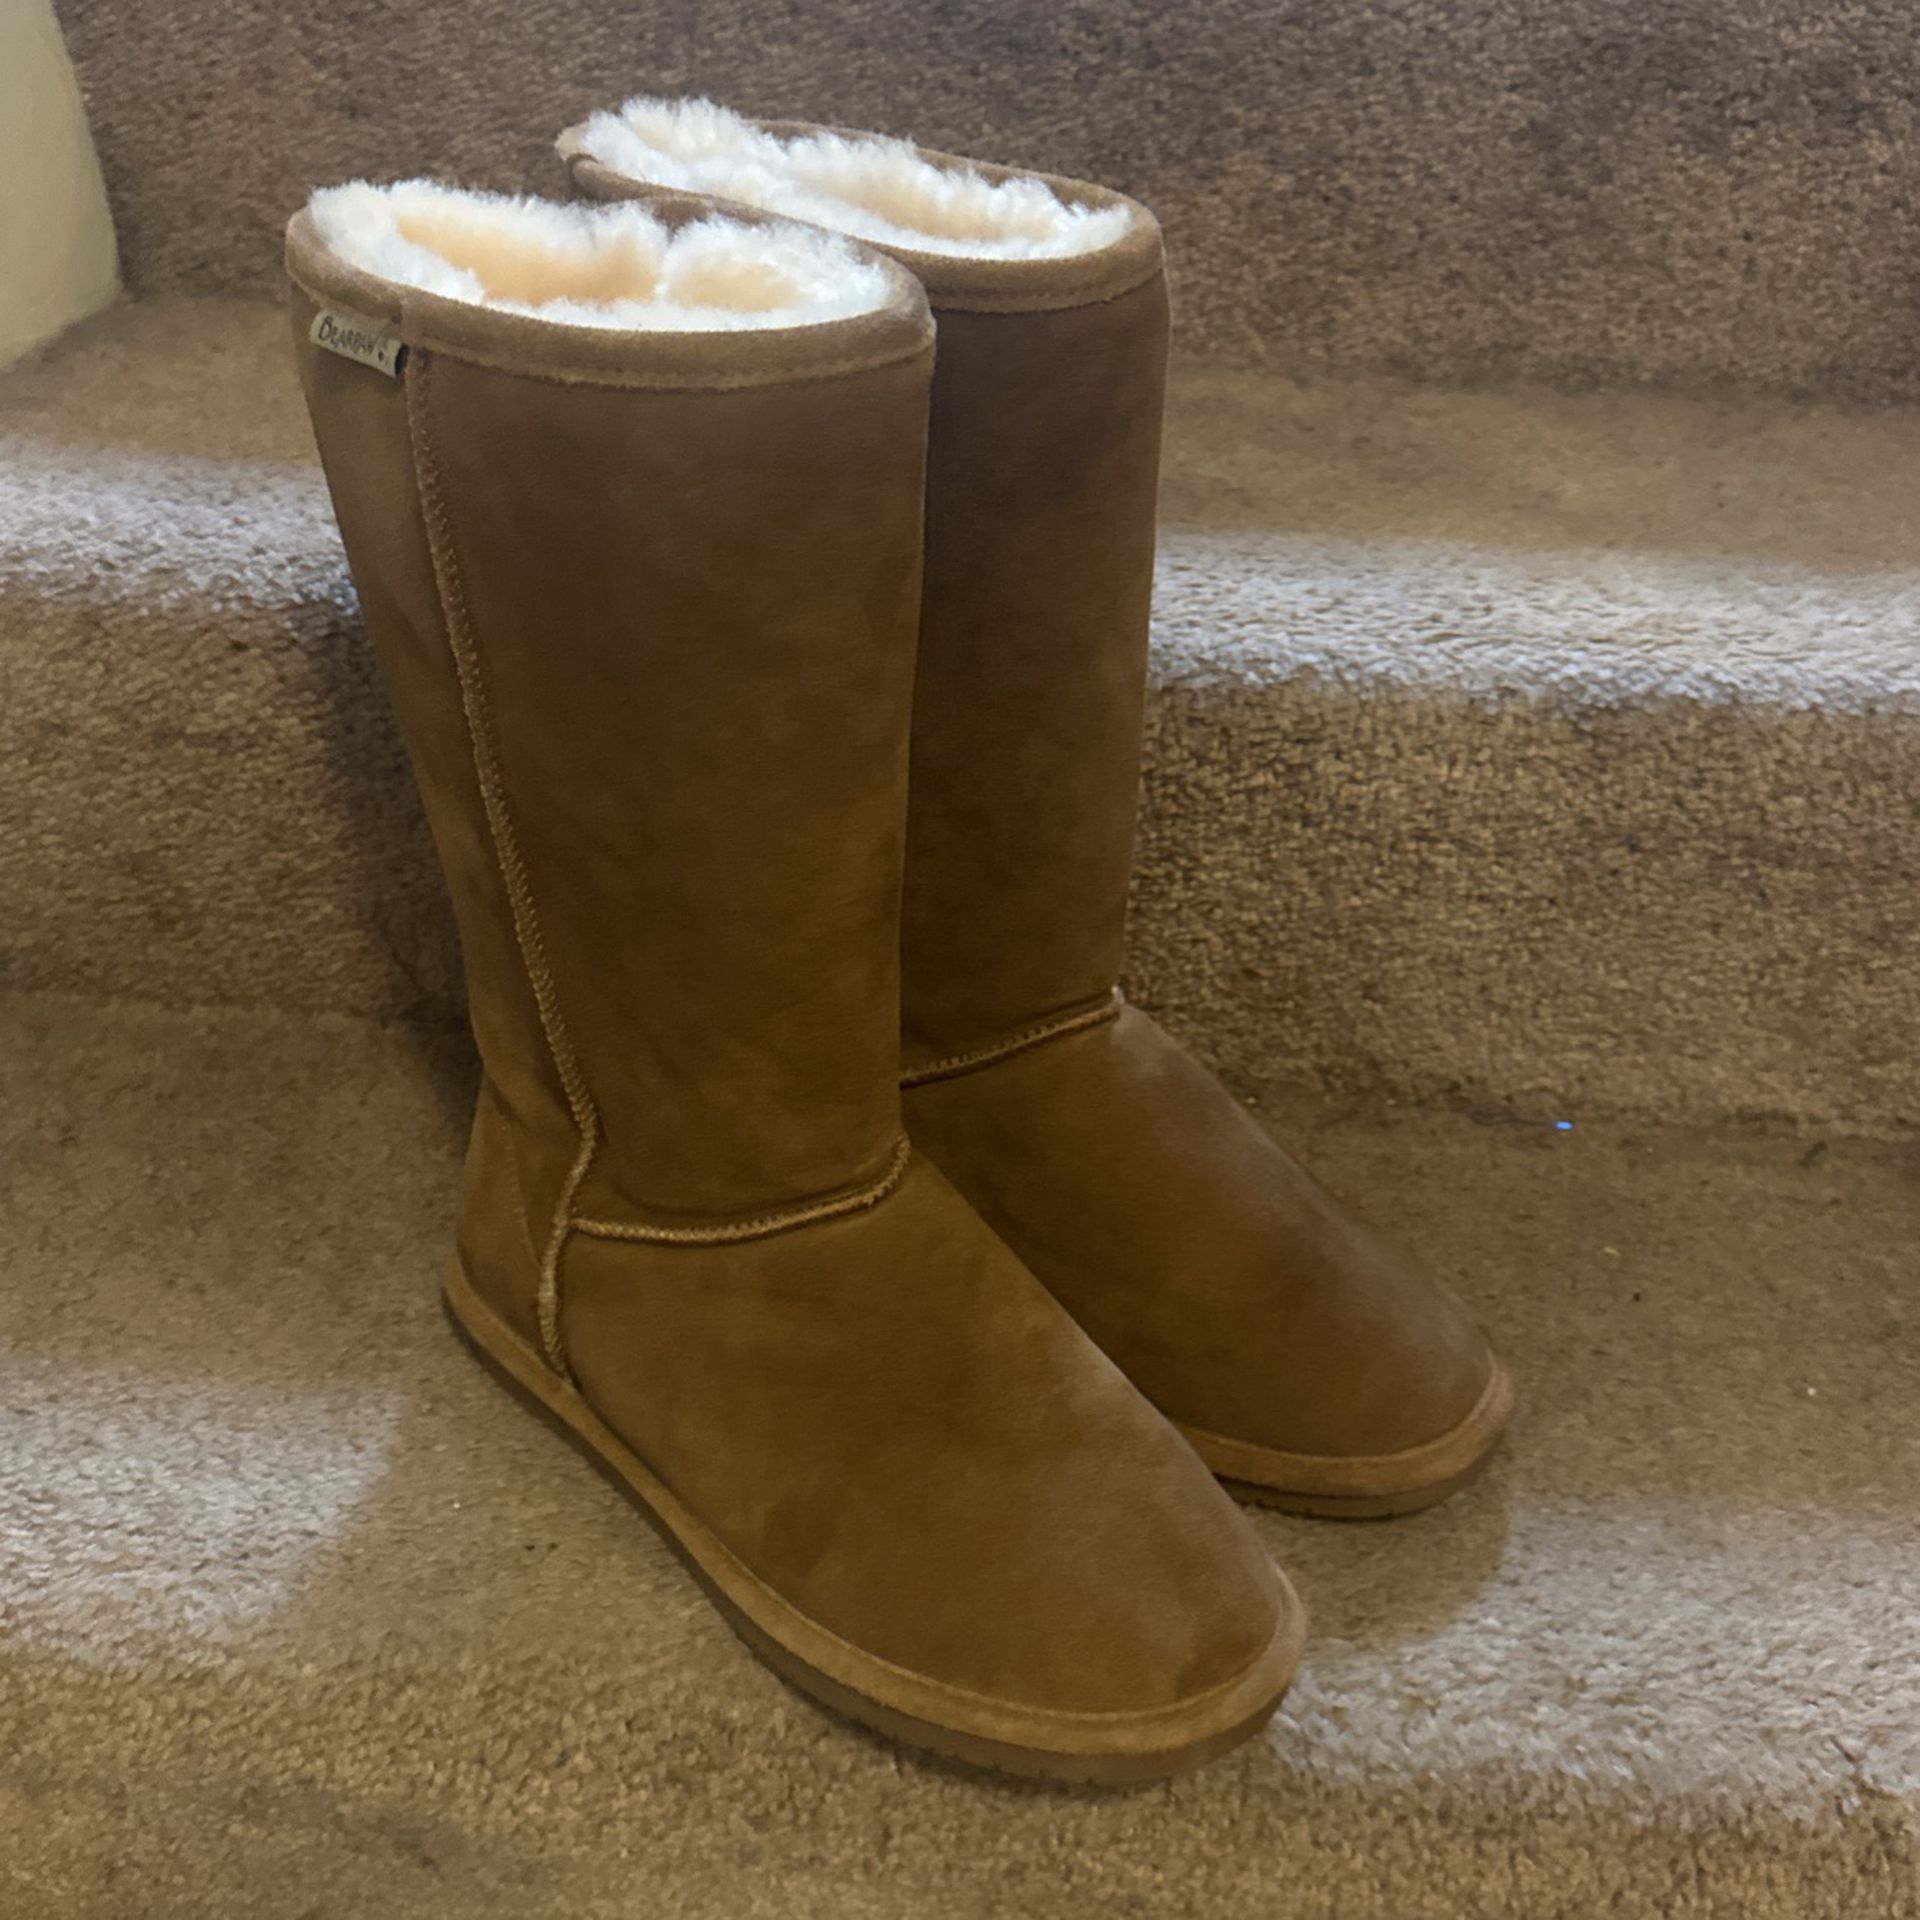 Bear paw Boots 